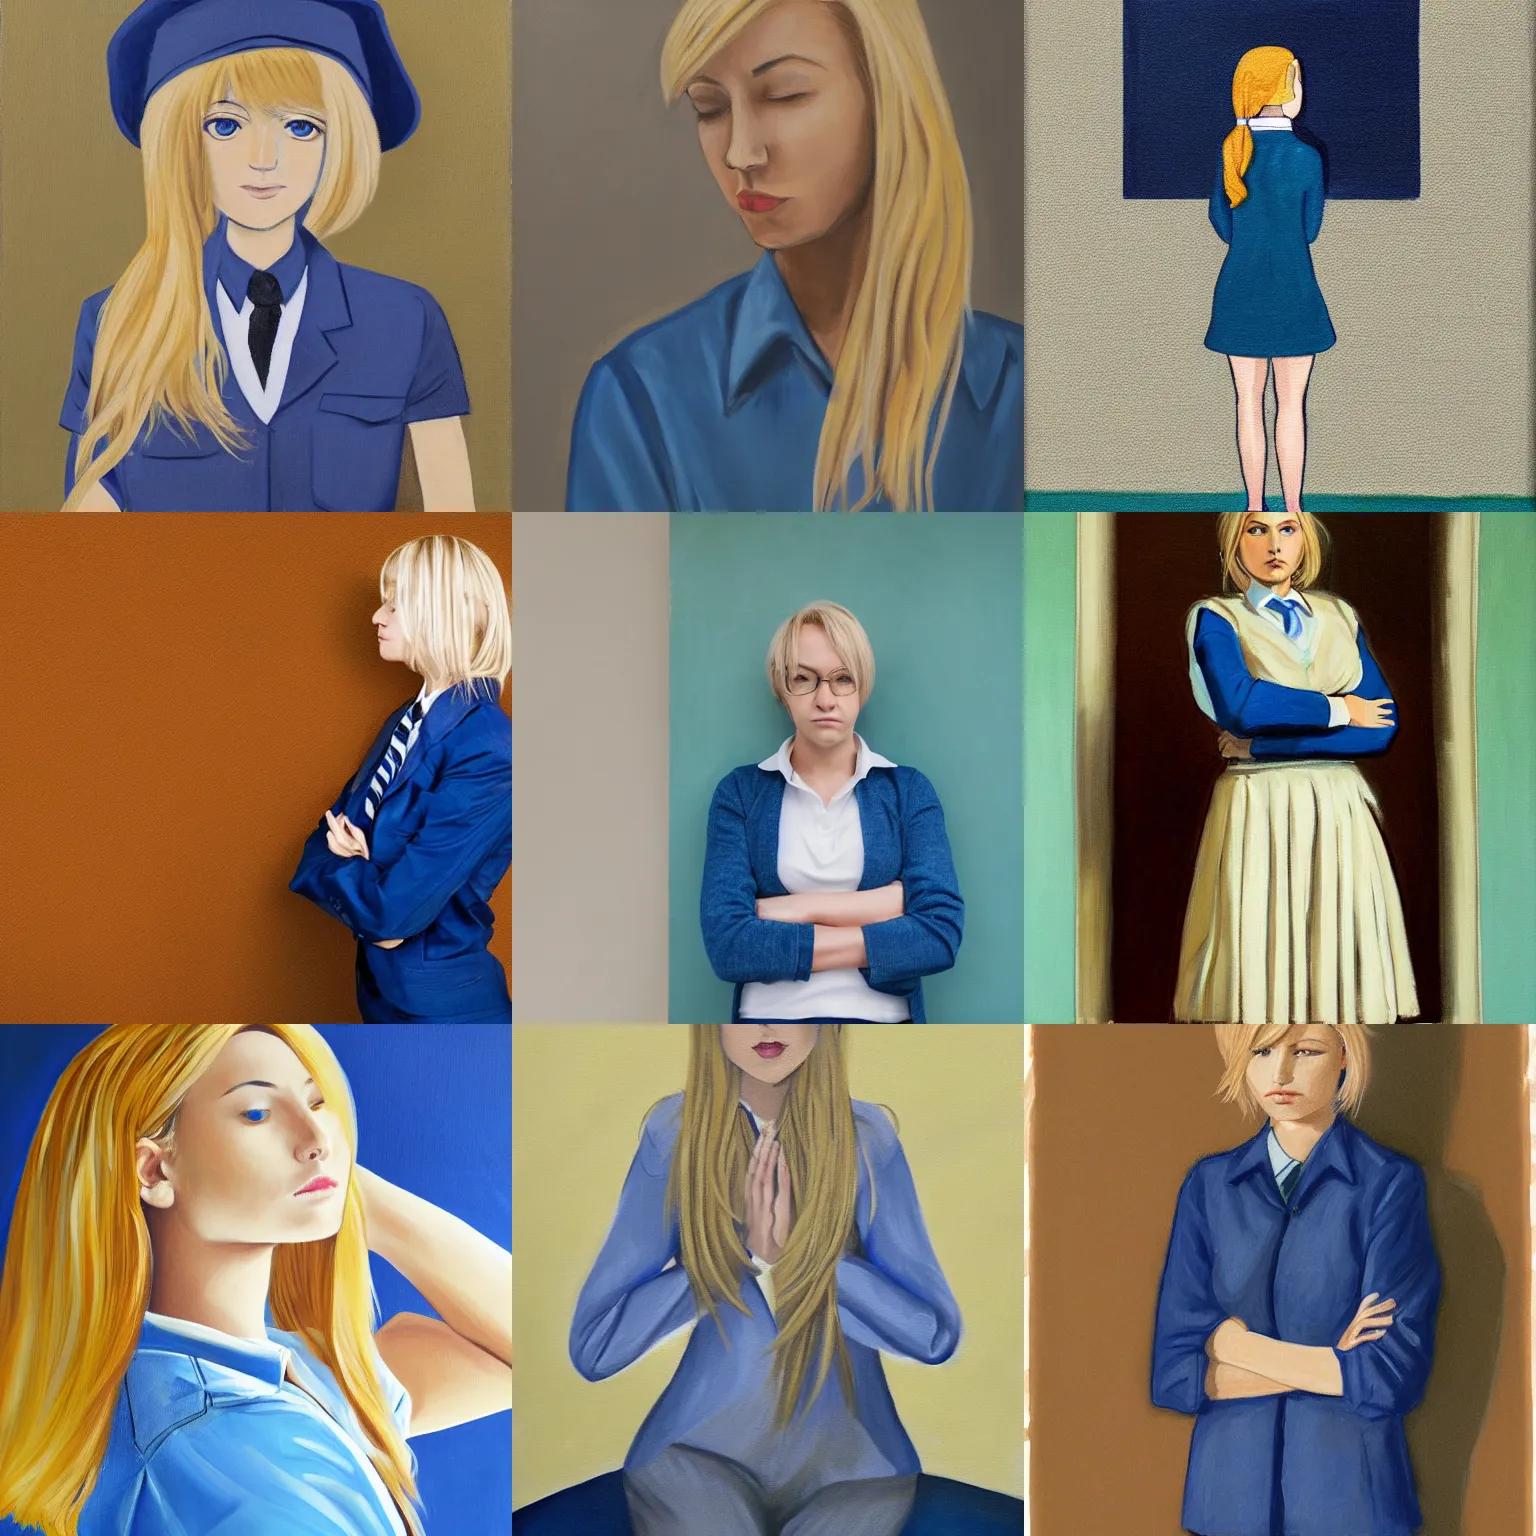 Prompt: a woman with blondehair and a blue college uniform leans idly/solemnly against a wall, arms crossed, looking down, styled hair, cool, calm, quiet, painting, art, full body